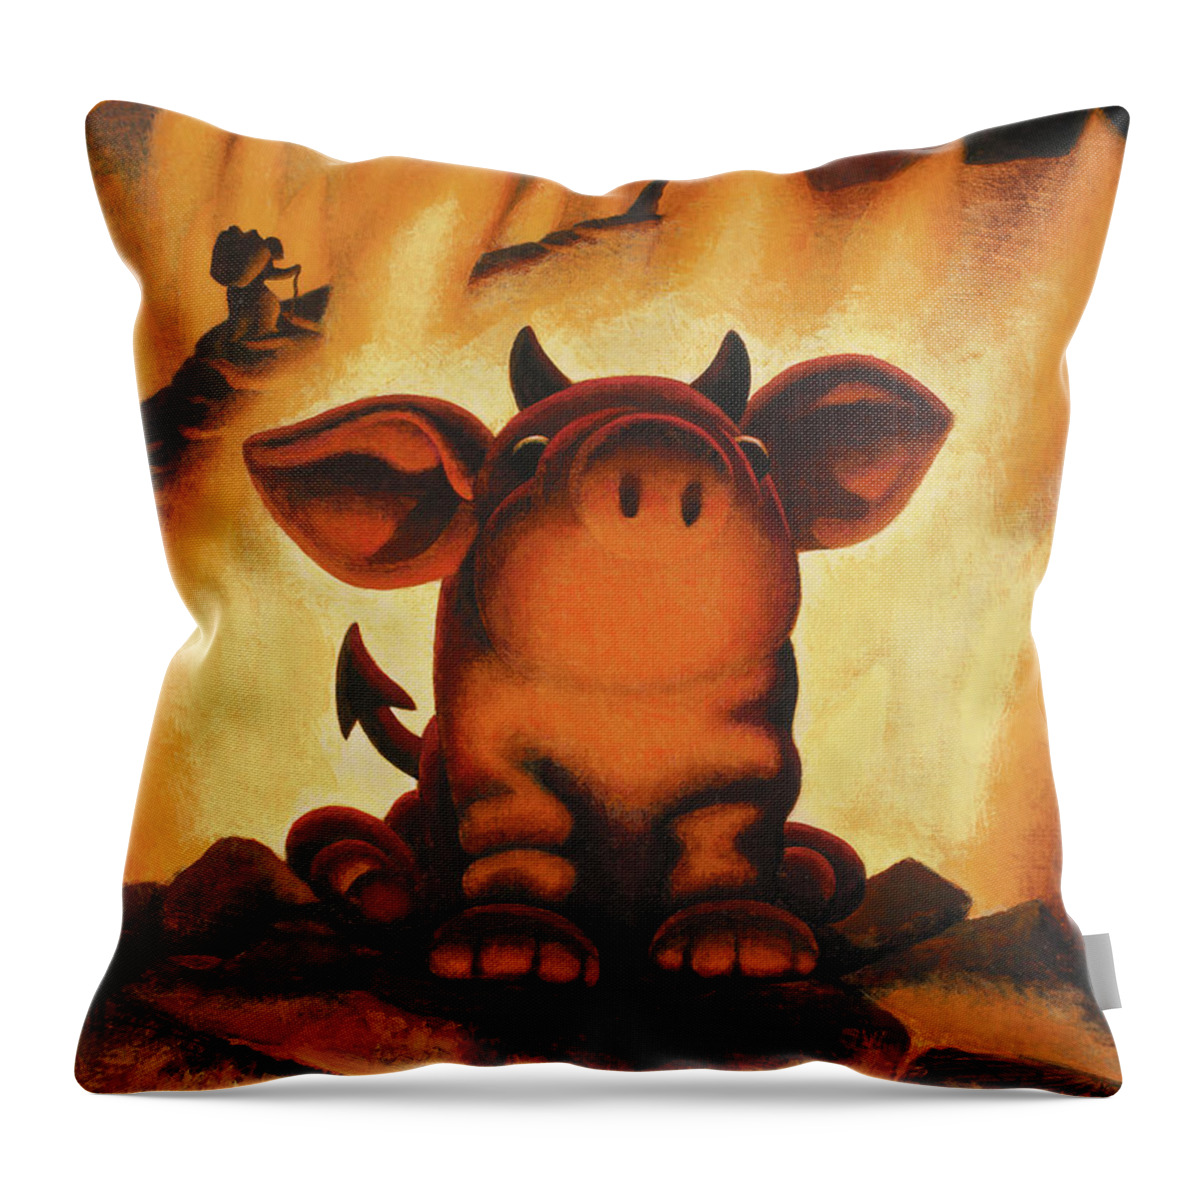 Pig Throw Pillow featuring the painting Lil' Devil by Chris Miles